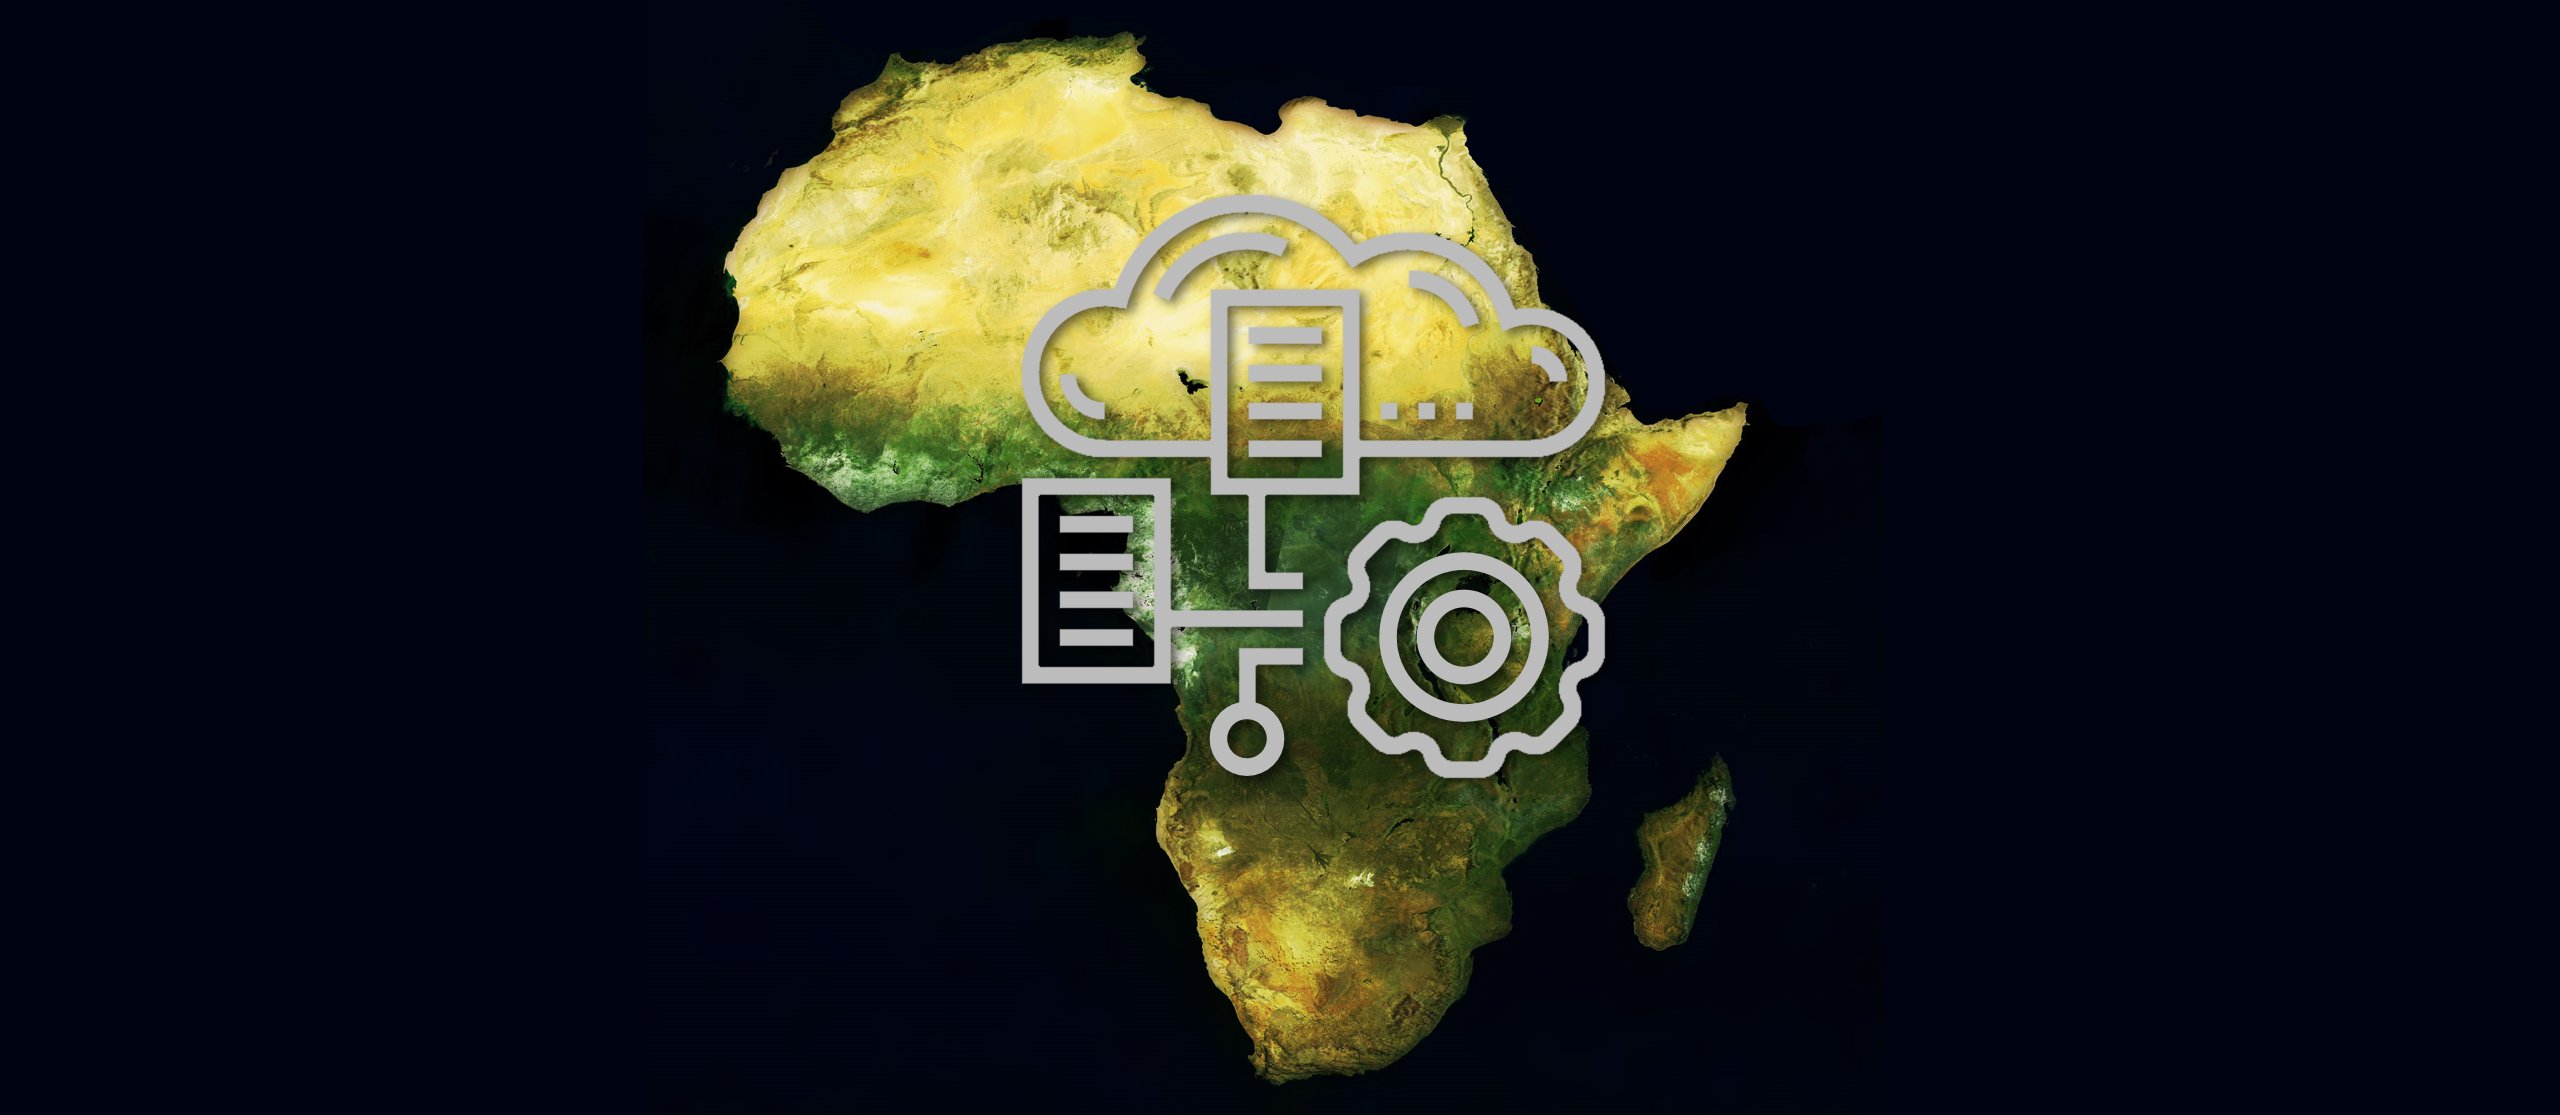 Registration is open for Face to Face course on Cloud Computing and Algorithms for EO Analyses